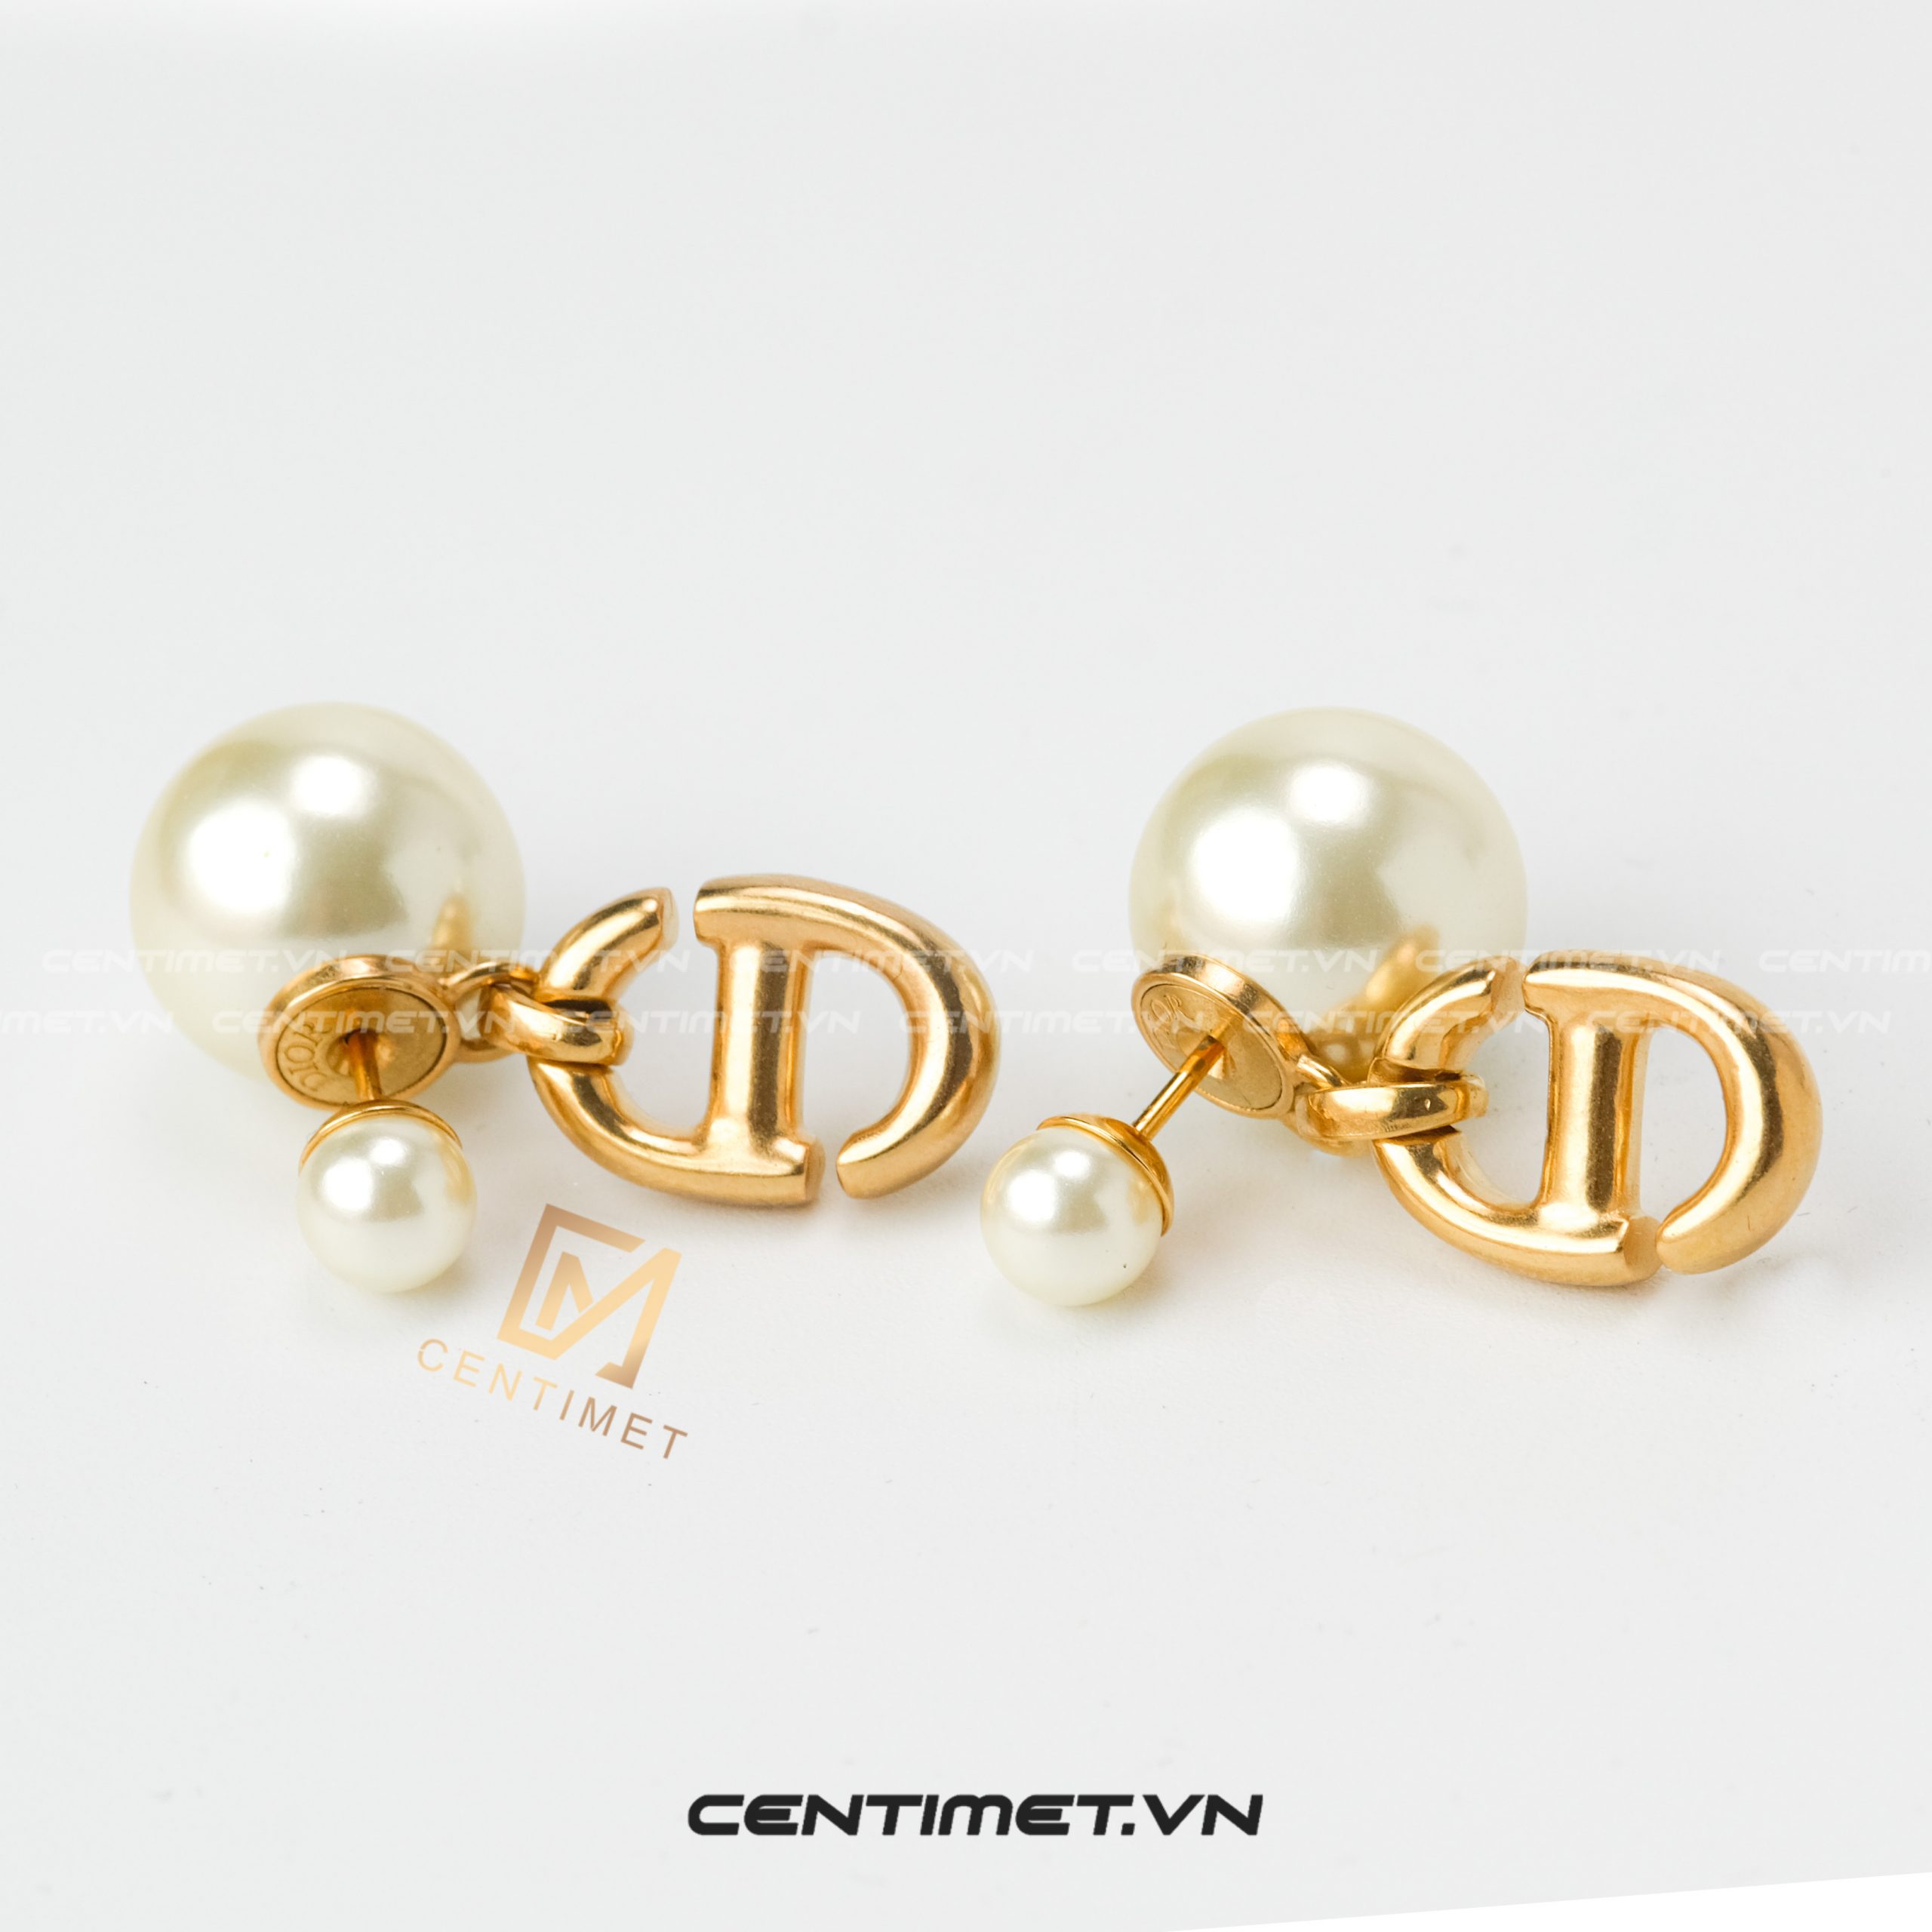 Christian Dior Earrings imitation Pearls in Gold Tone Metal date circa  2013 Lillys Attic since 2001